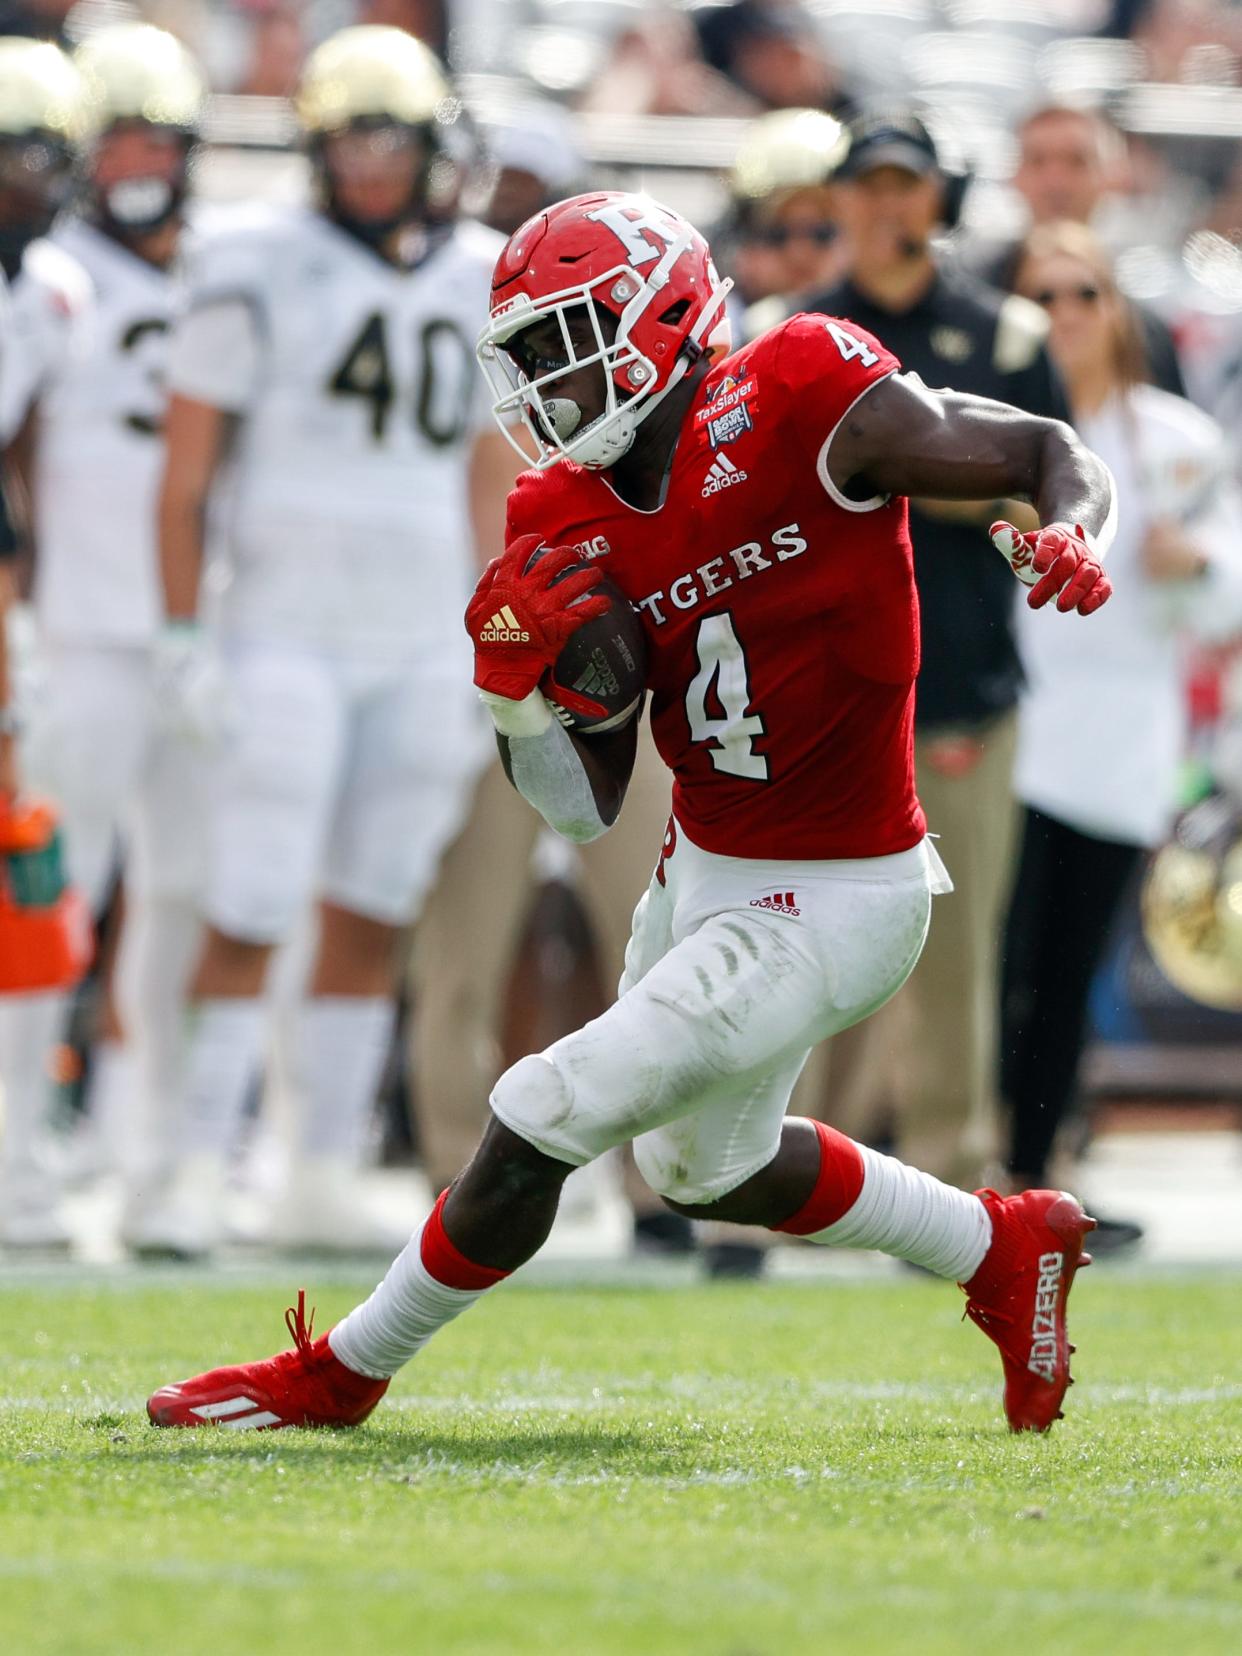 Rutgers football running back Aaron Young is returning to his home state of Pennsylvania this weekend as the Scarlet Knights play Penn State at Beaver Stadium.